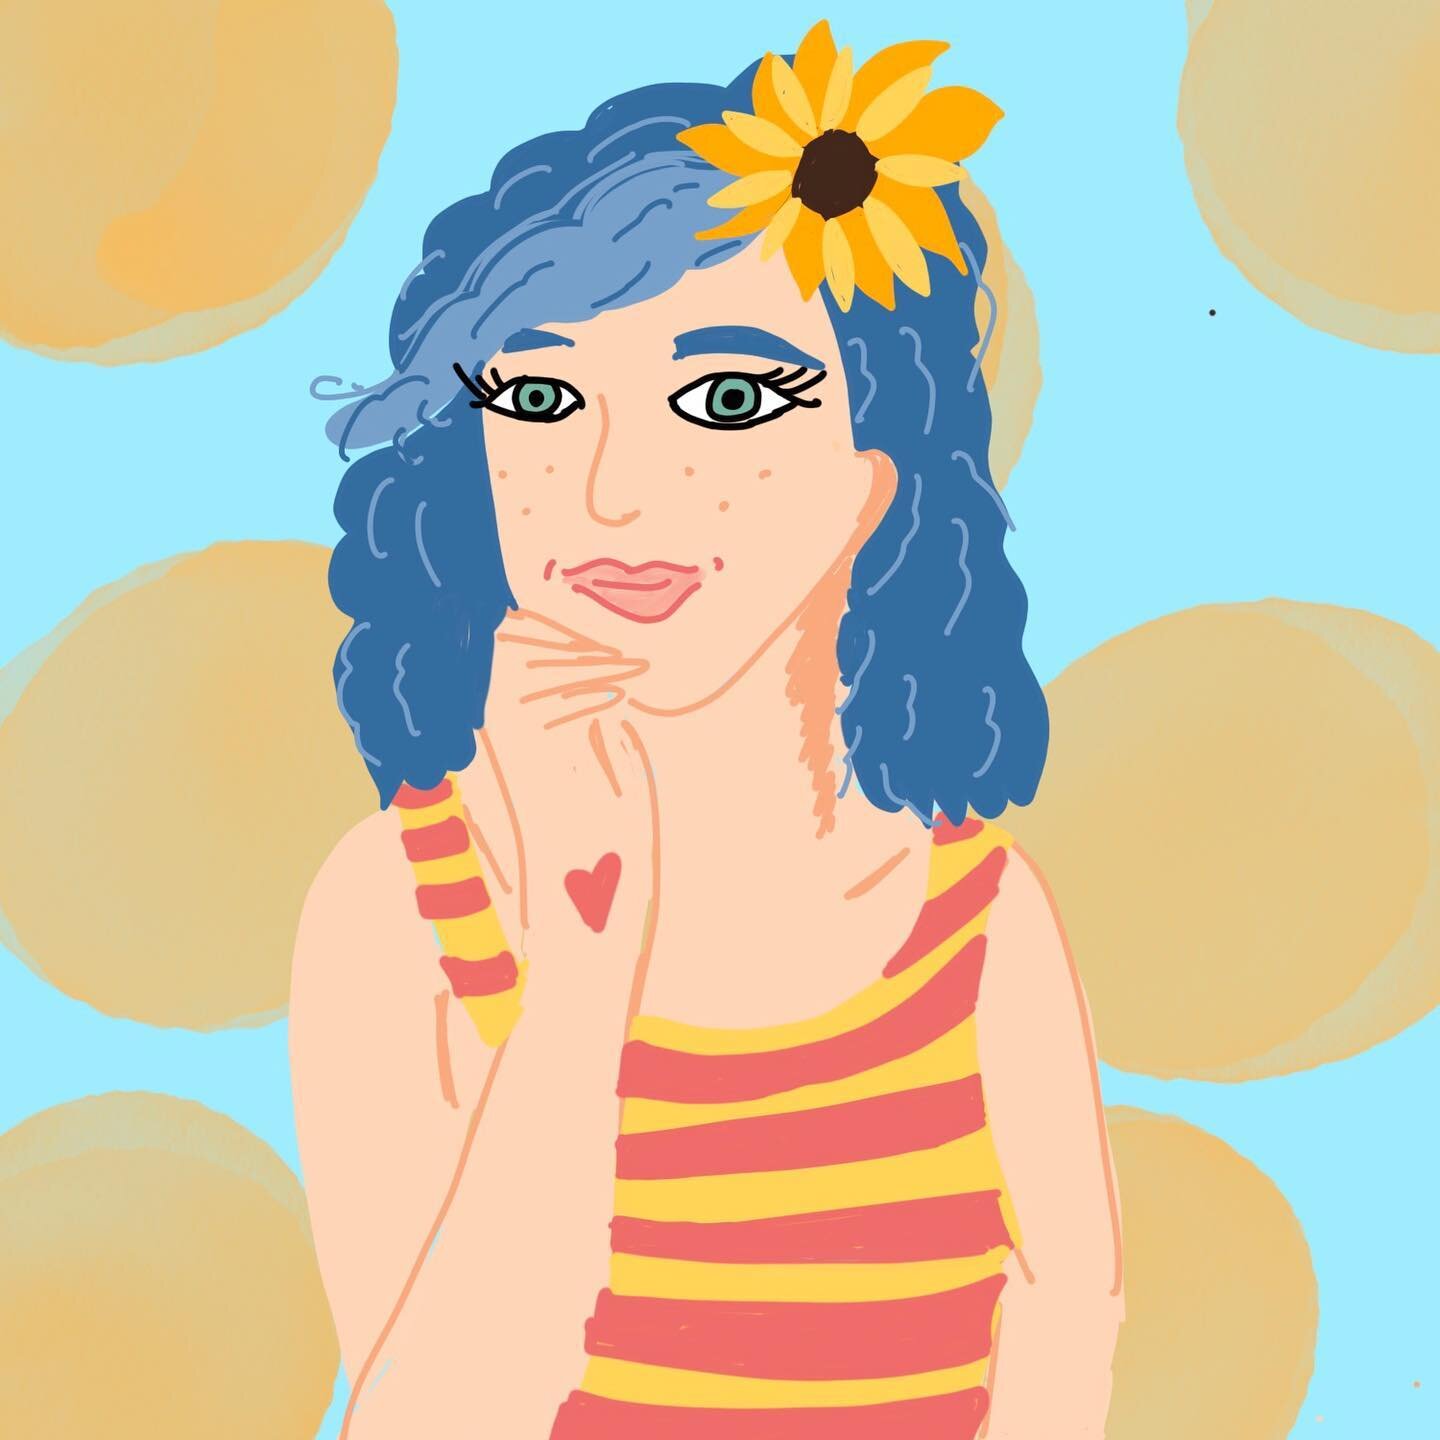 Trying to get back into drawing after a long break with #funwithfaces from @charlyclements 

Todays prompt was sunflower, tattoo, pattern. Given how long it&rsquo;s been I&rsquo;m pretty happy with this, although hands are hard!